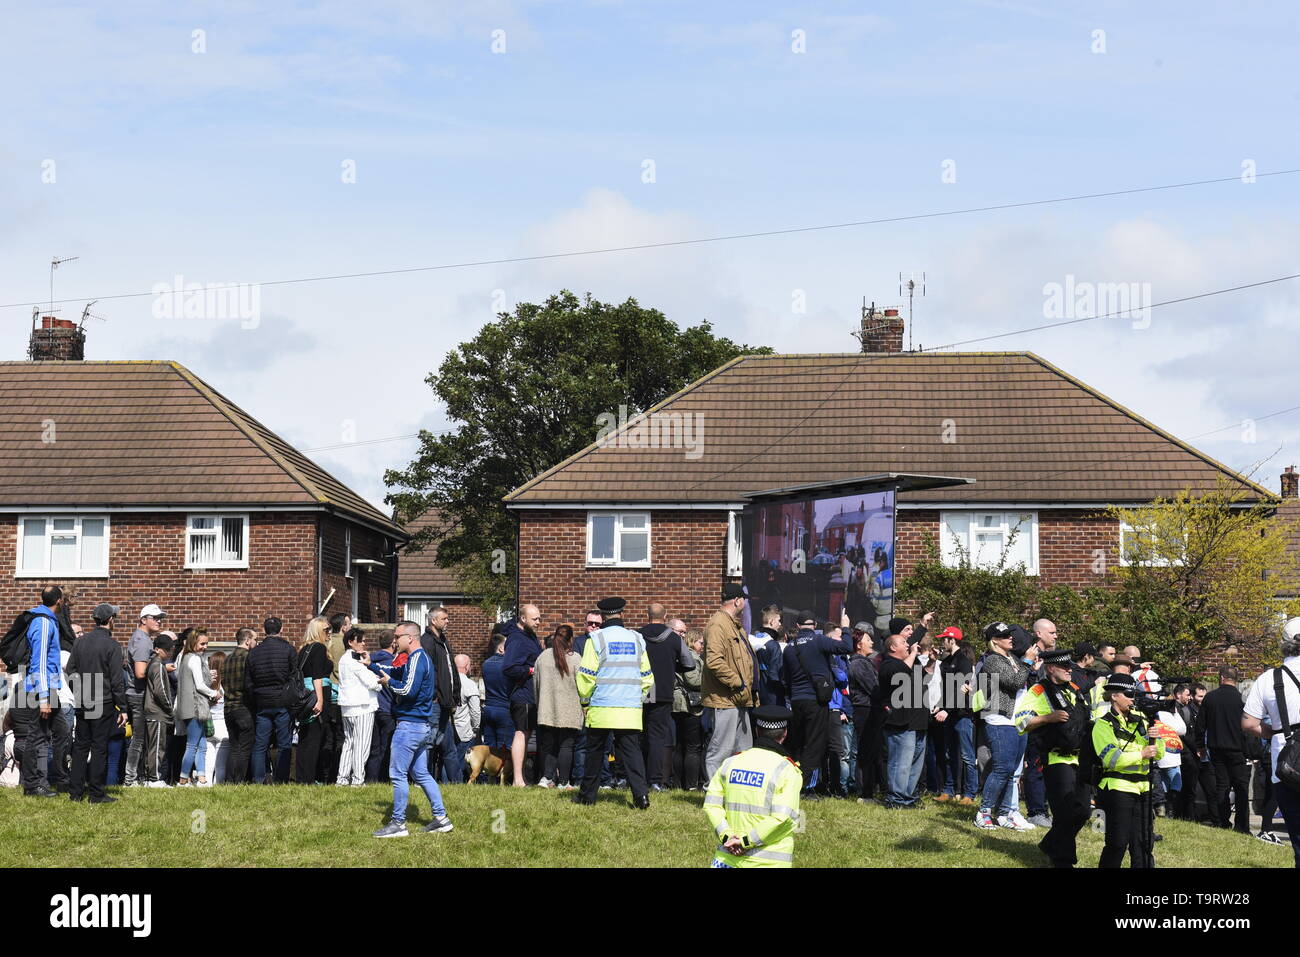 Supporters of Tommy Robinson, who is campaigning in Bootle, Liverpool ahead of this weeks European Elections.  Police kept supporters and counter-demonstrators apart but clashed with counter-demonstrators ahead of Tommy Robinson's arrival. Credit David J Colbran Stock Photo